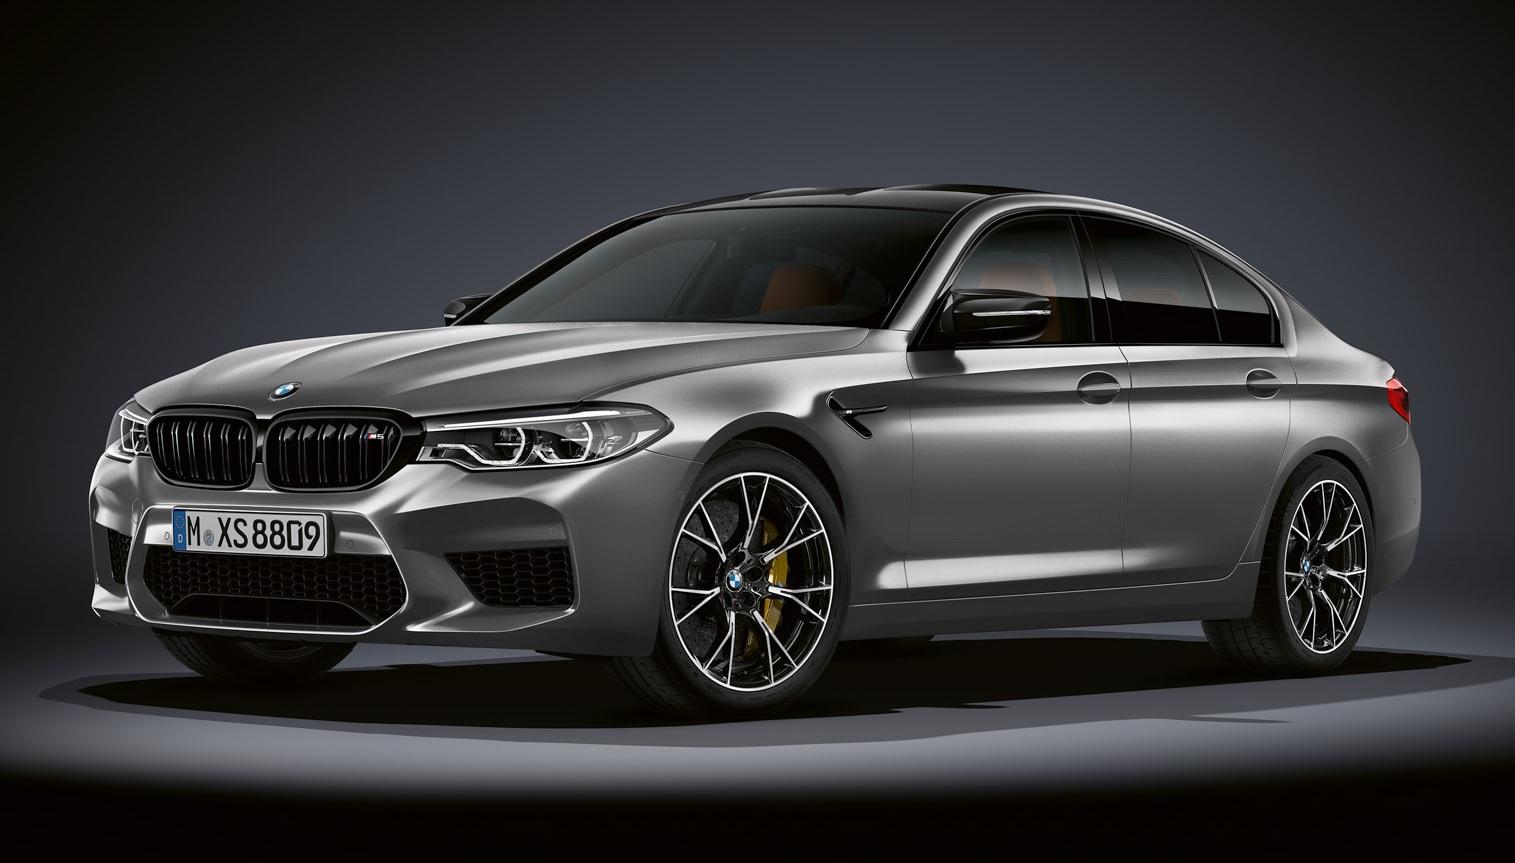 The drive System of the new BMW M5